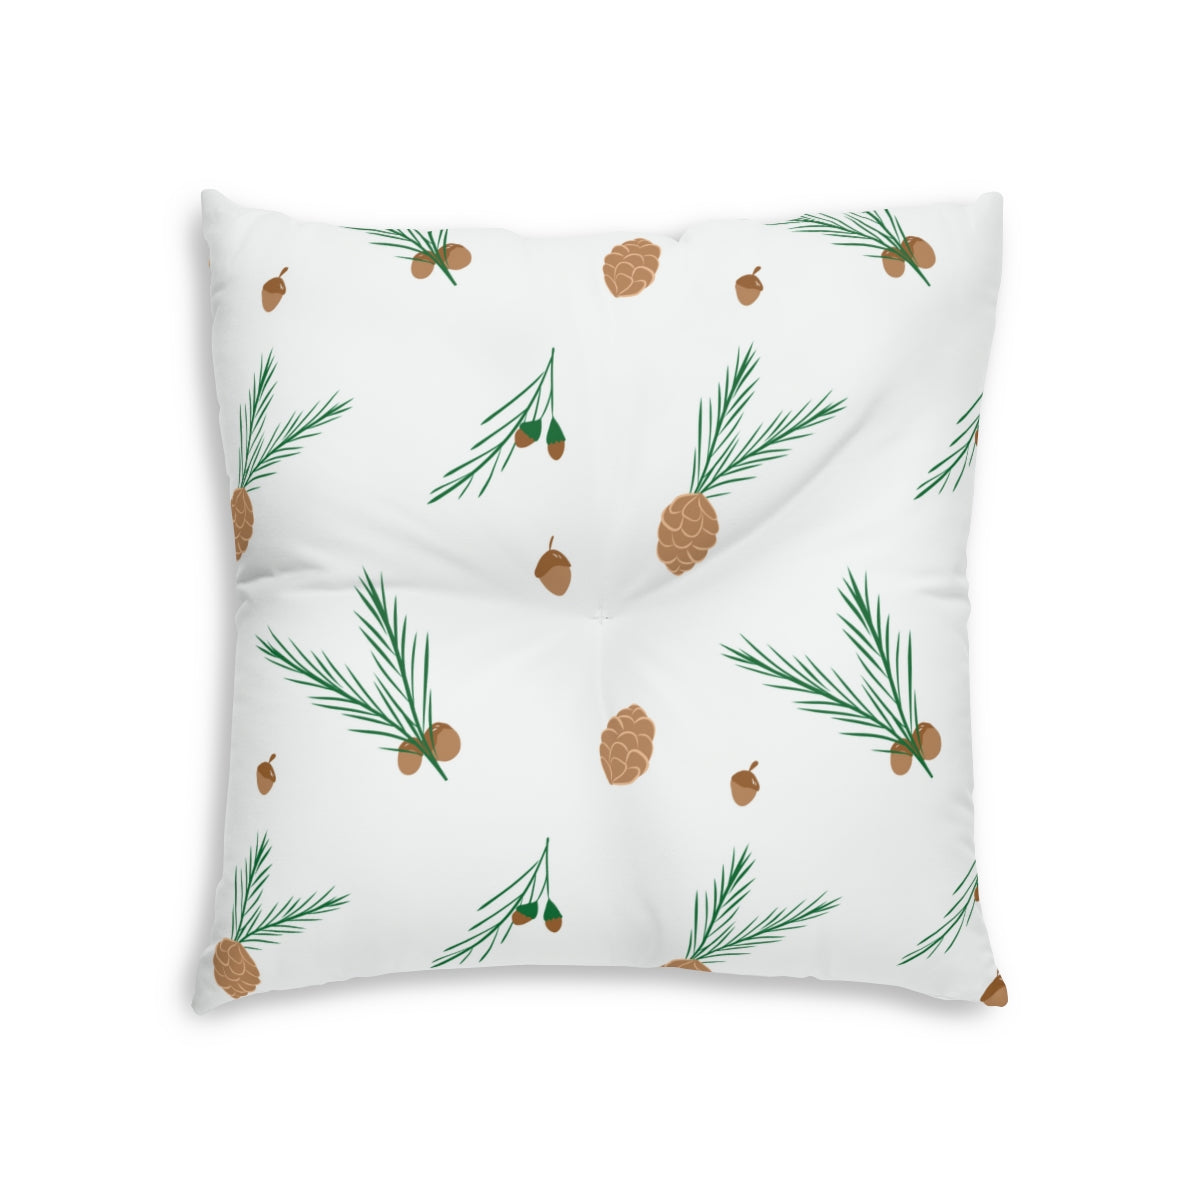 Lifestyle Details - White Square Tufted Holiday Floor Pillow - Pinecones - 26x26 - Front View